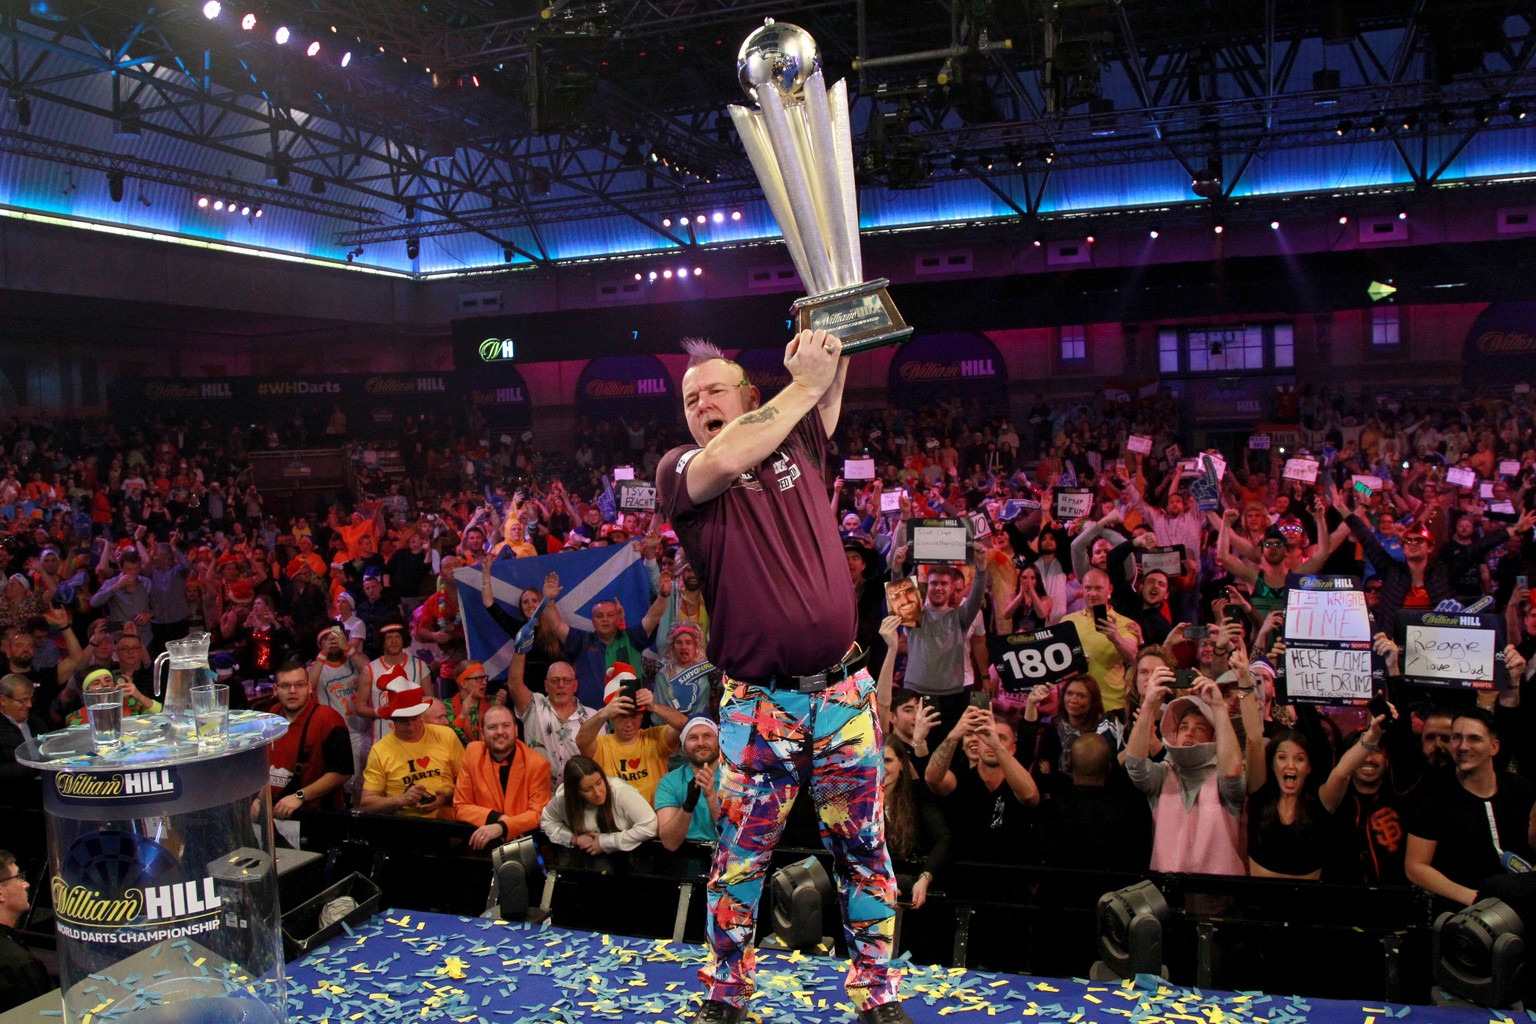 epa08098304 Scottish player Peter Wright poses with his trophy after winning the PDC World darts Final match against Michael van Gerwen at the Alexander Palace in North London, Britain, 01 January 202 ...